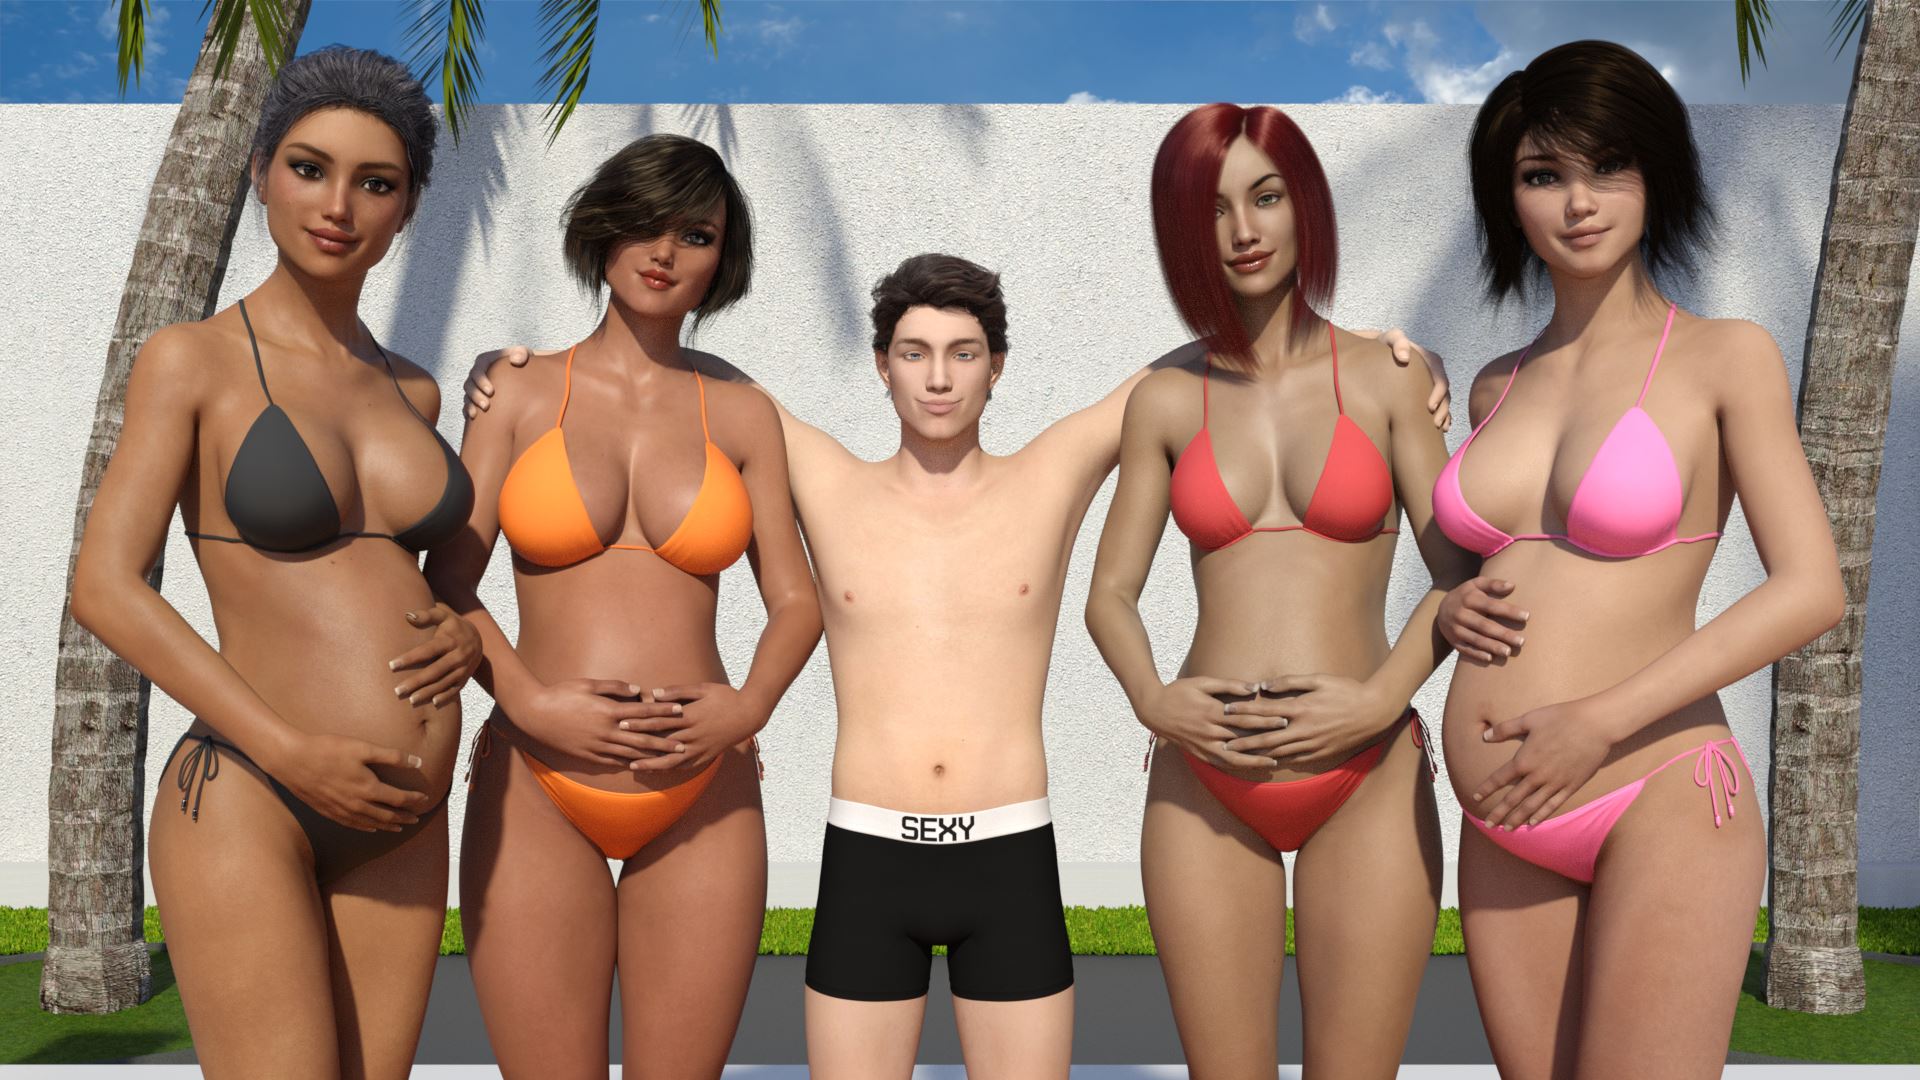 Big Brother Expanding The Family porn xxx game download cover